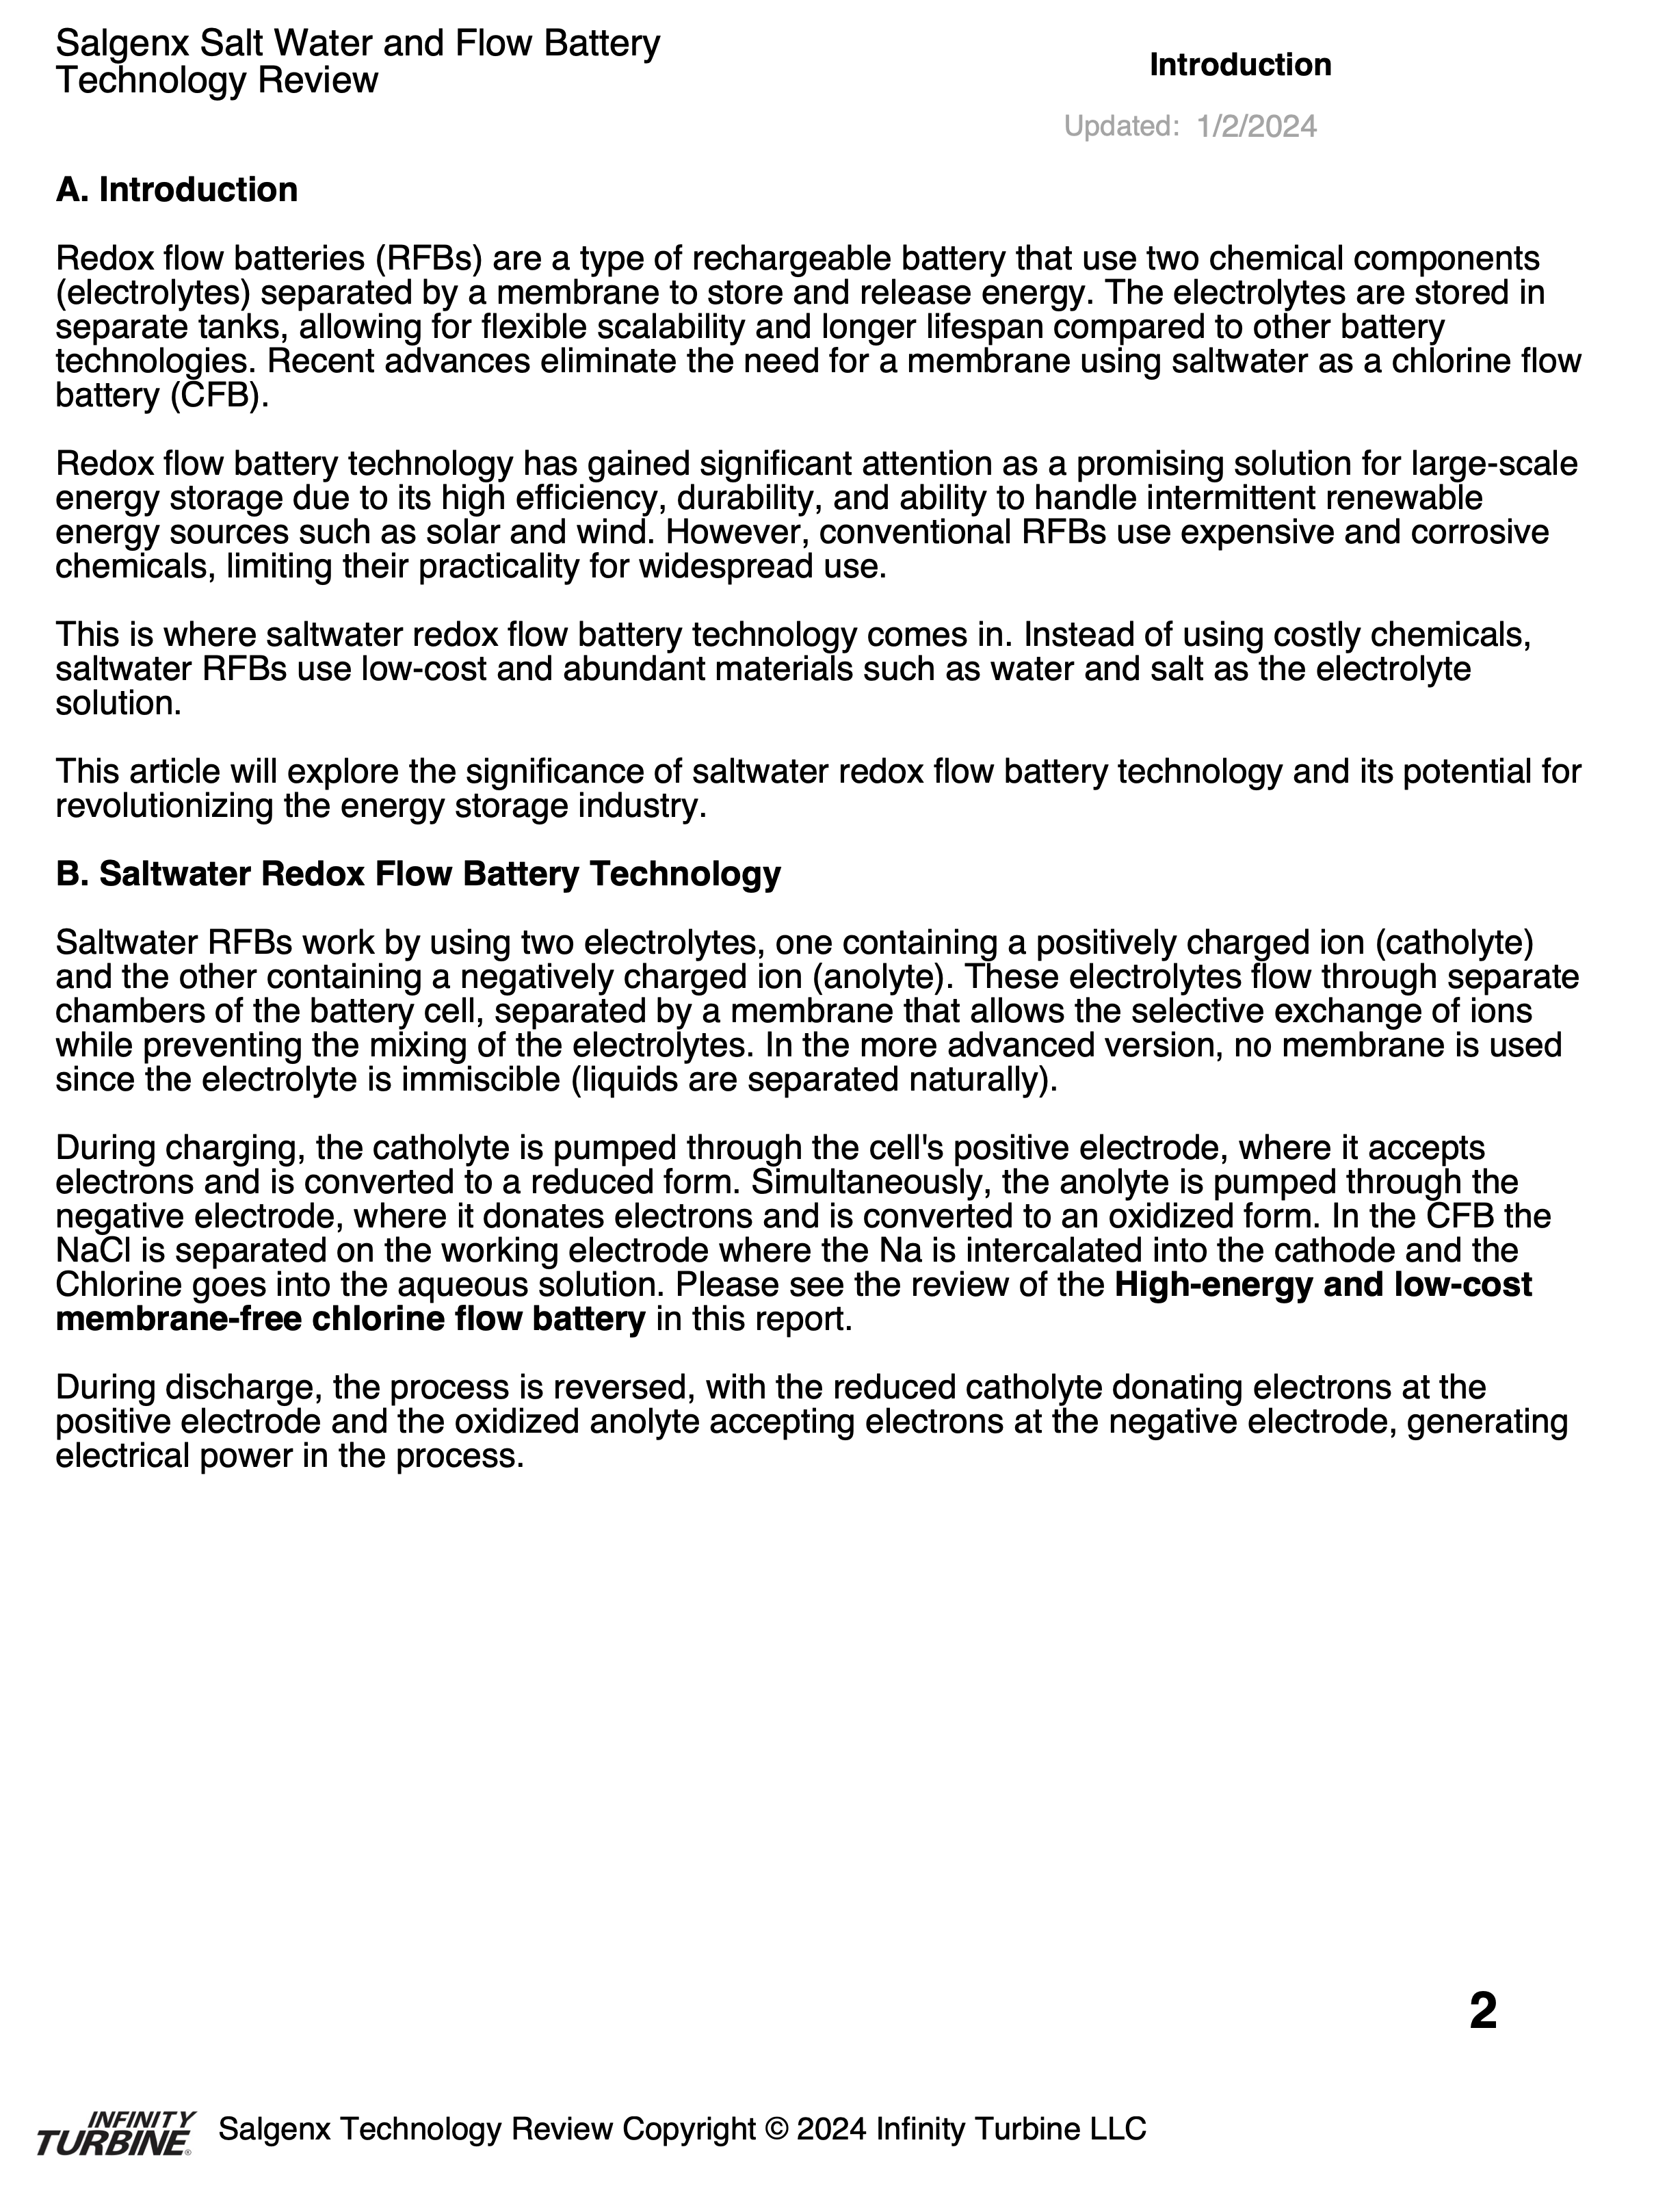 Sample page from technology report